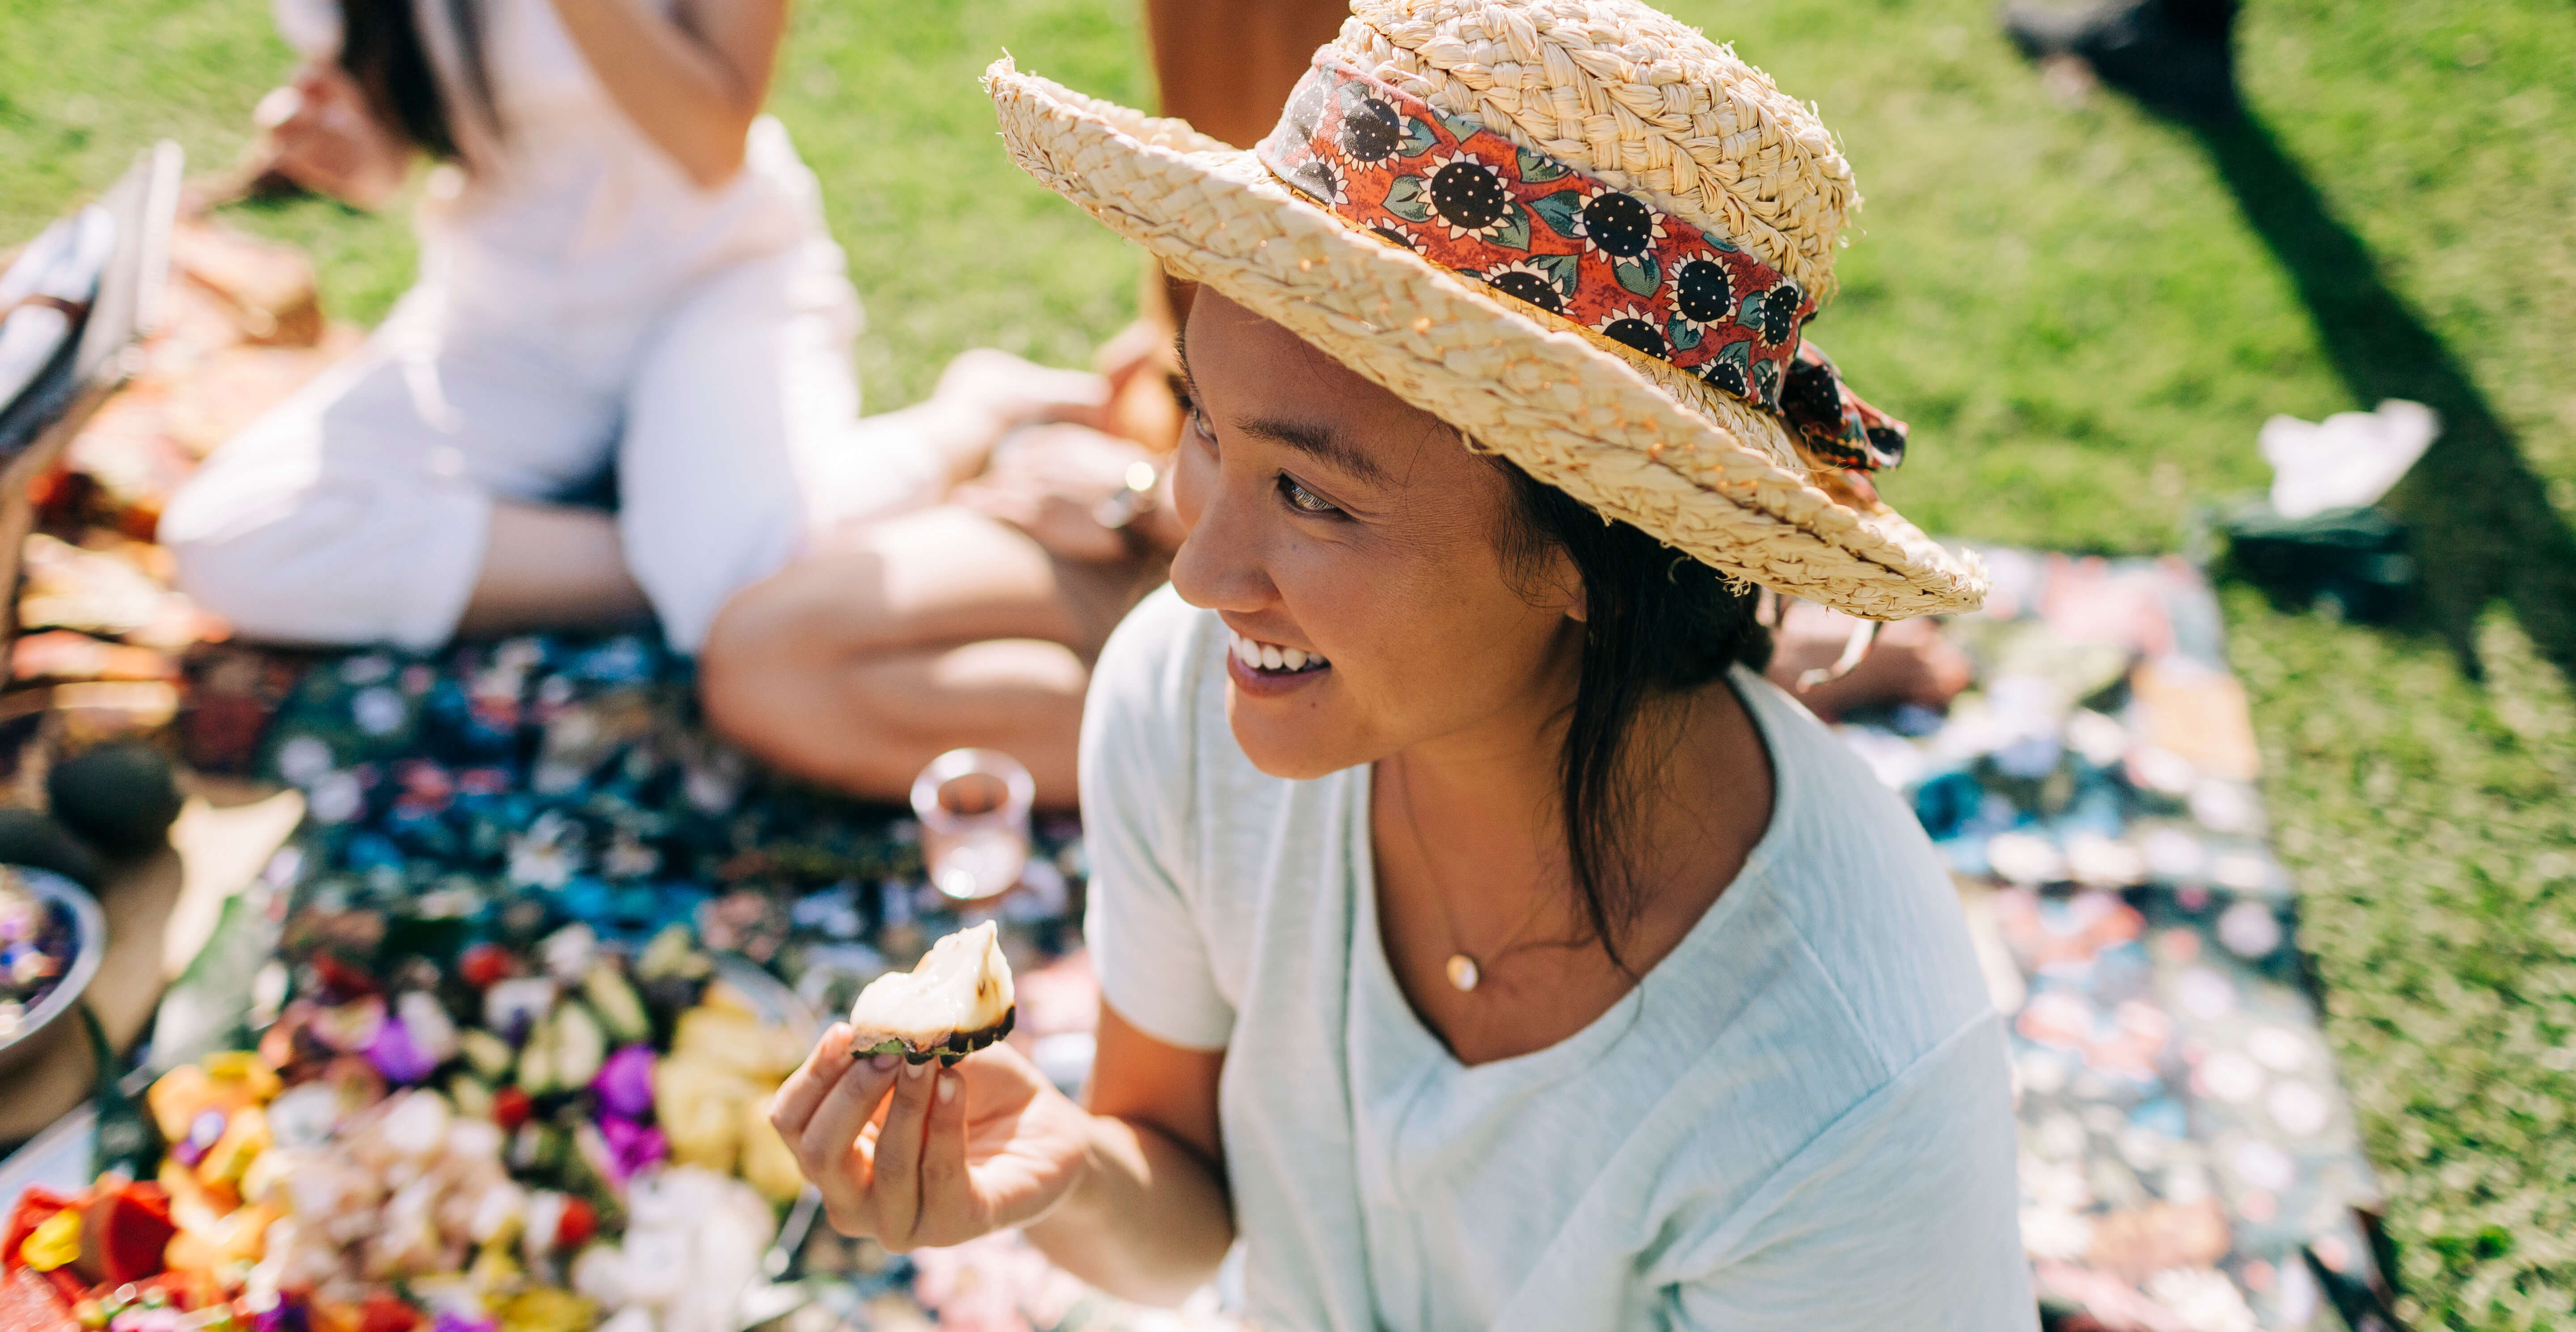 Woman with a hat enjoying some food at a picnic with friends